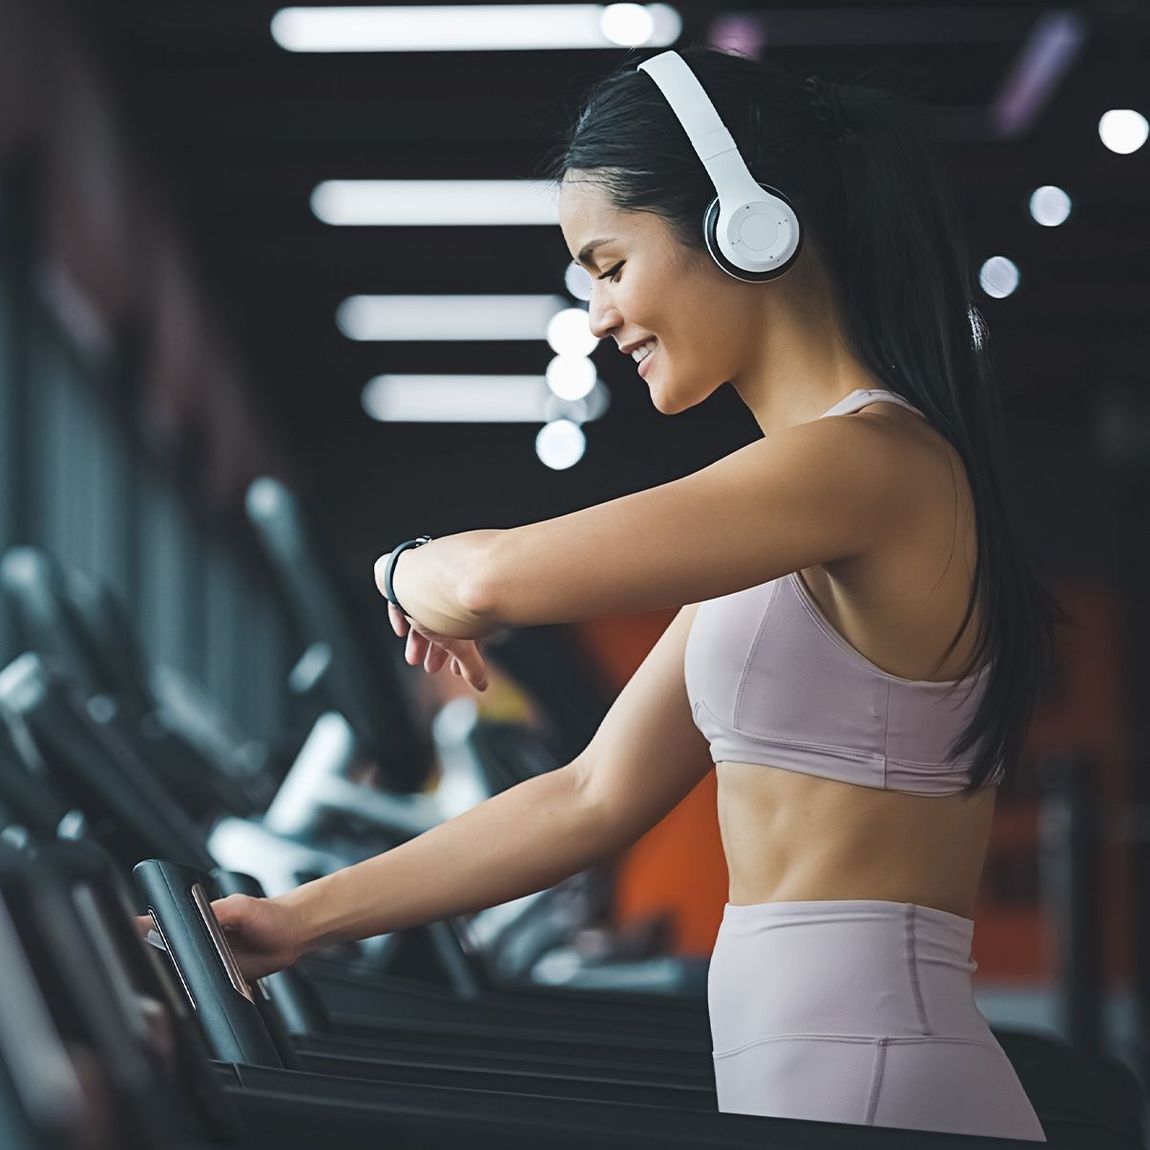 A girl is working out in the fitness center, wearing white headphones.